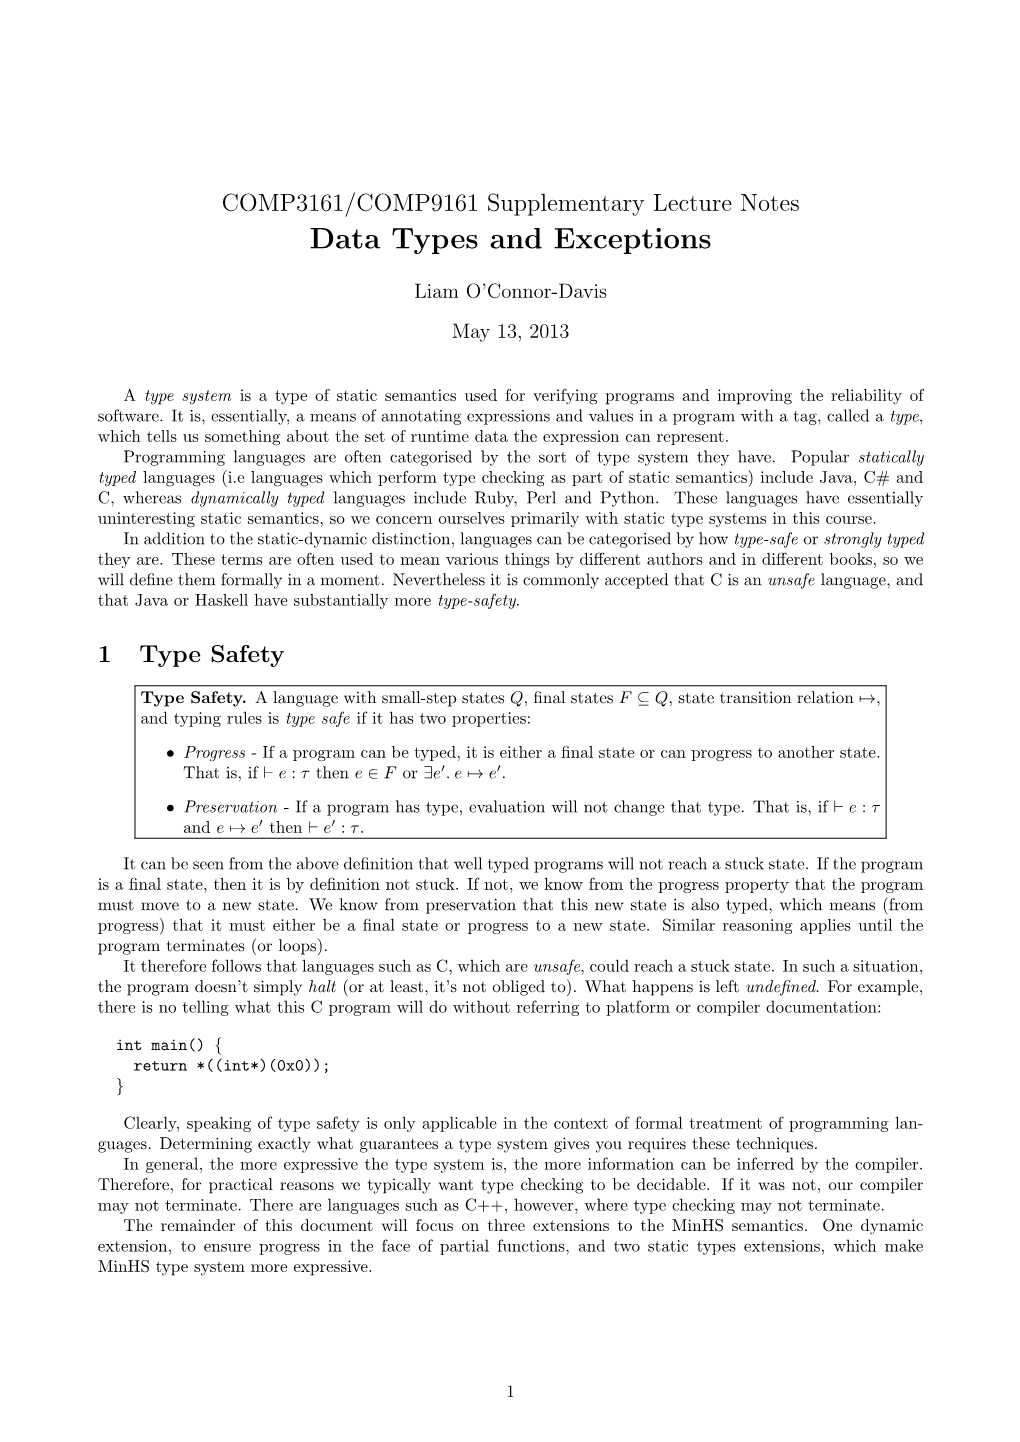 Data Types and Exceptions